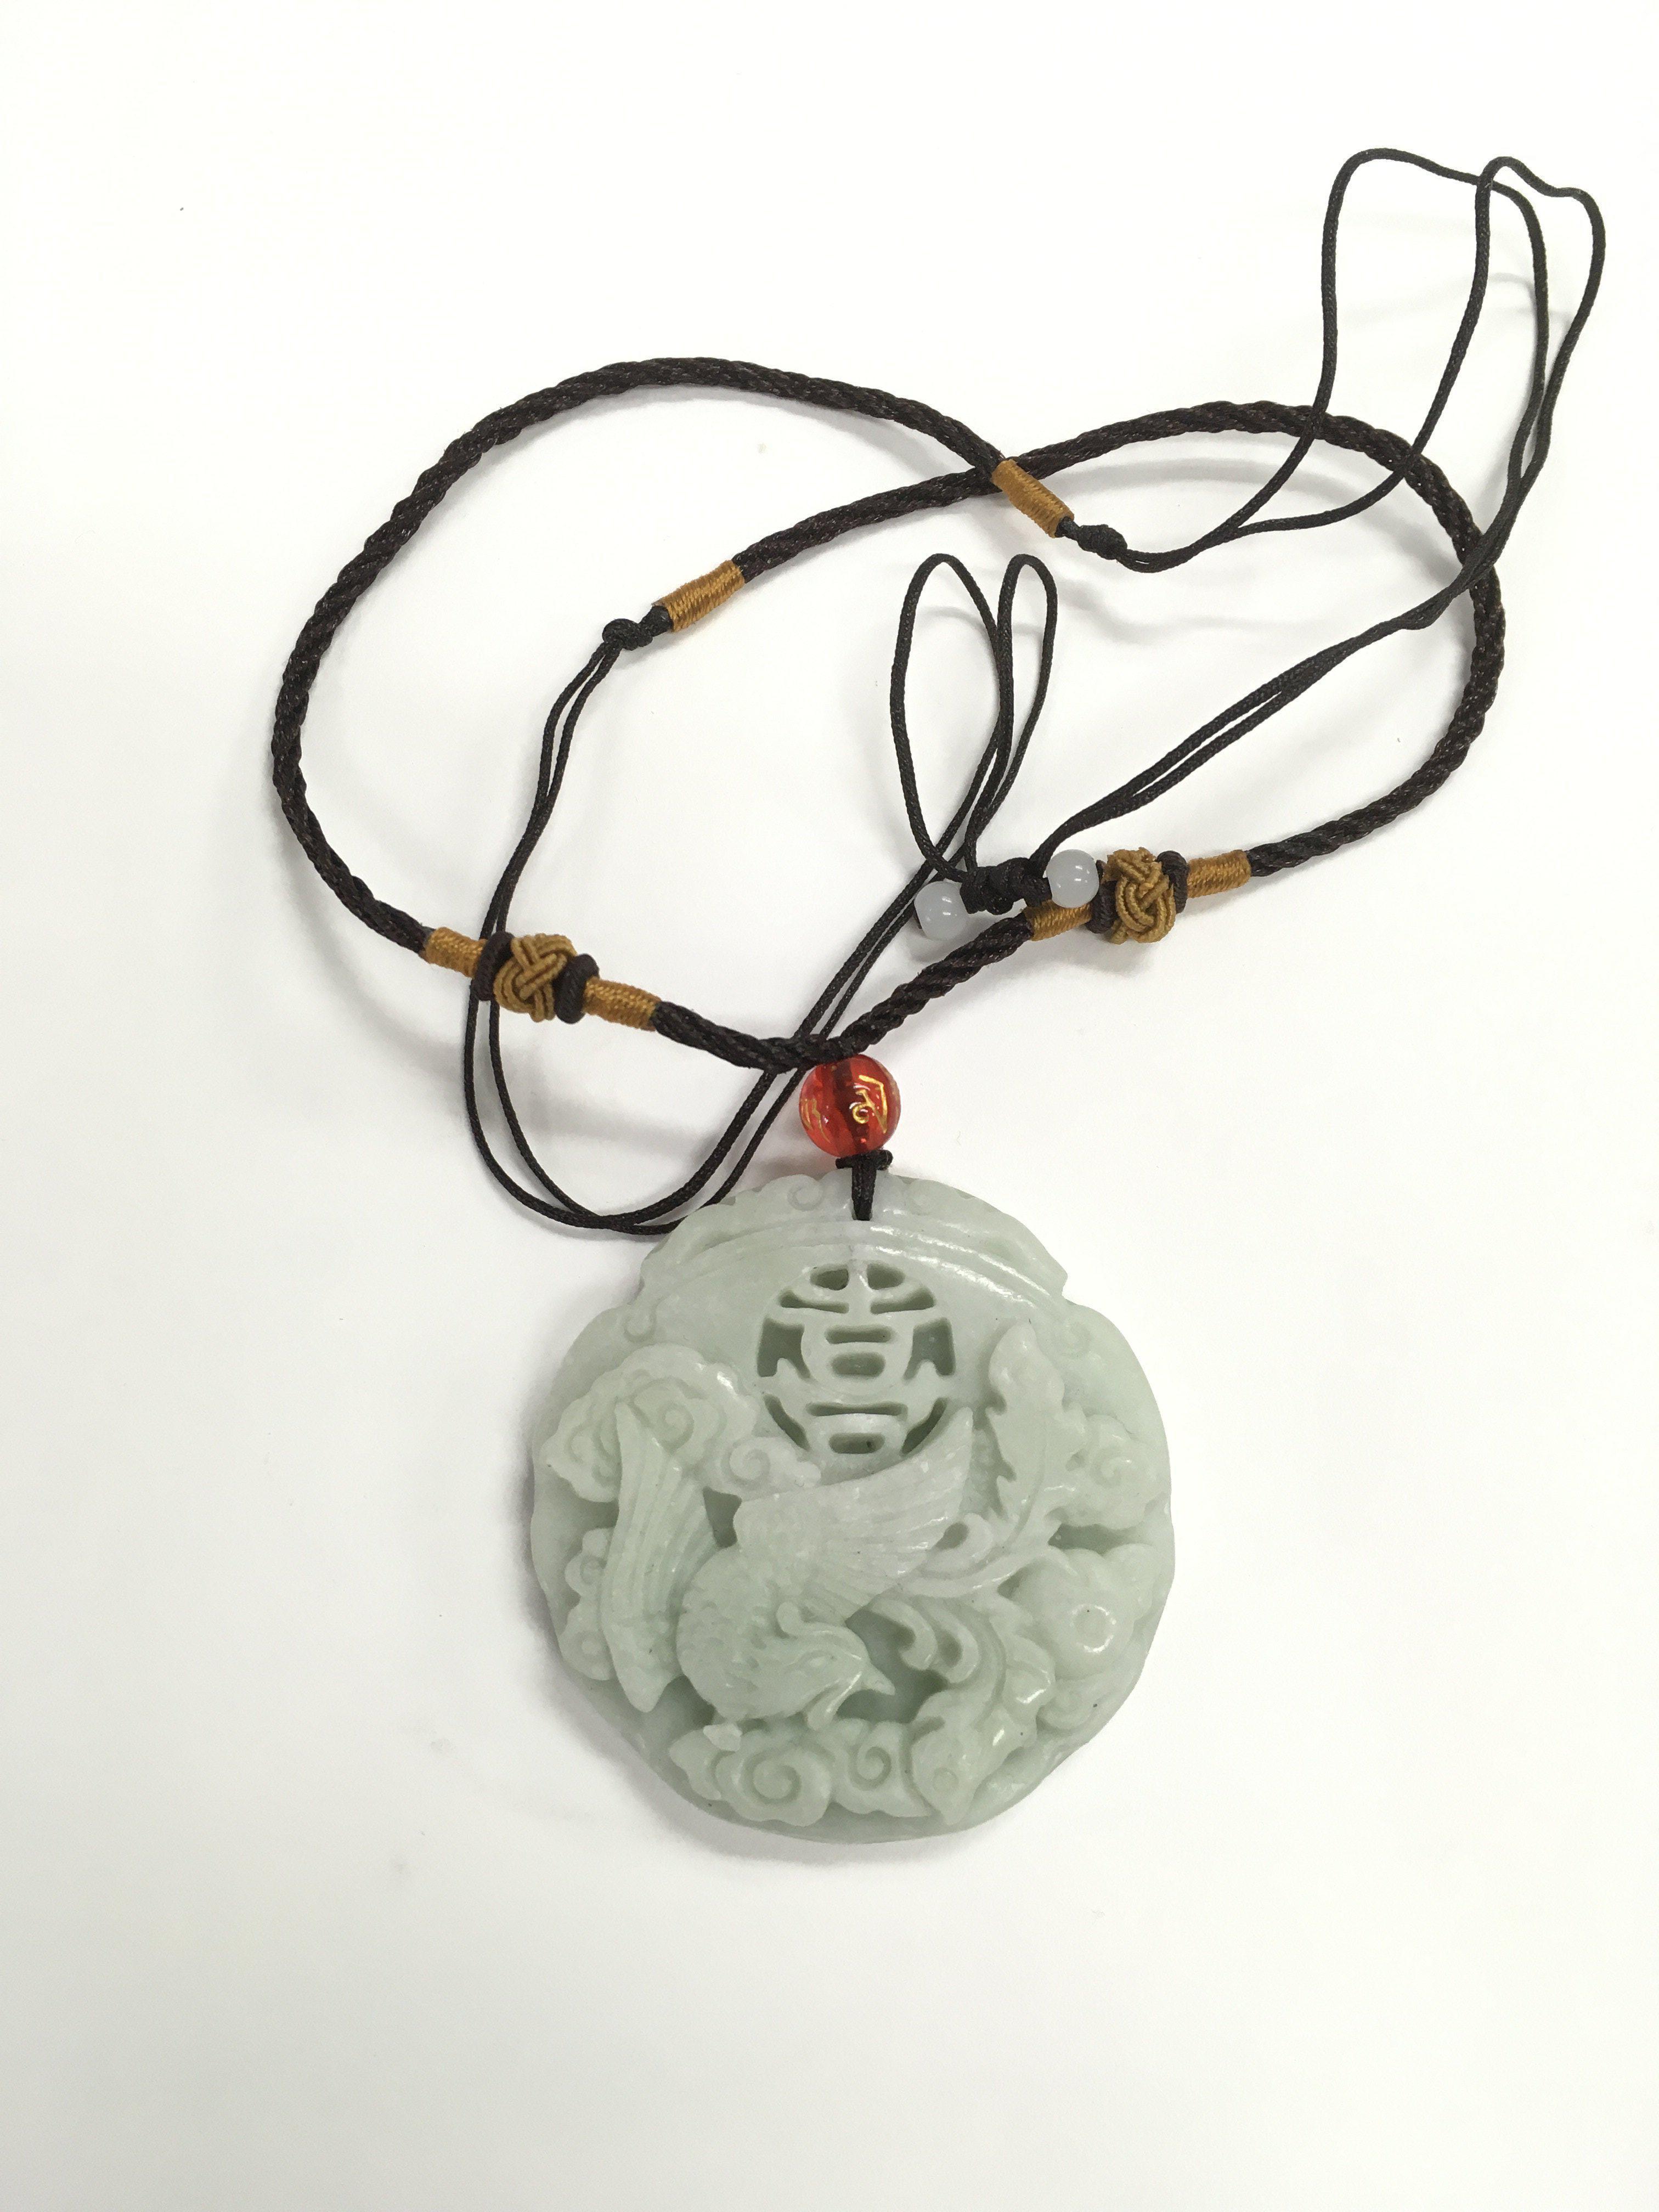 A jade style pendant suspended on a braided cord,